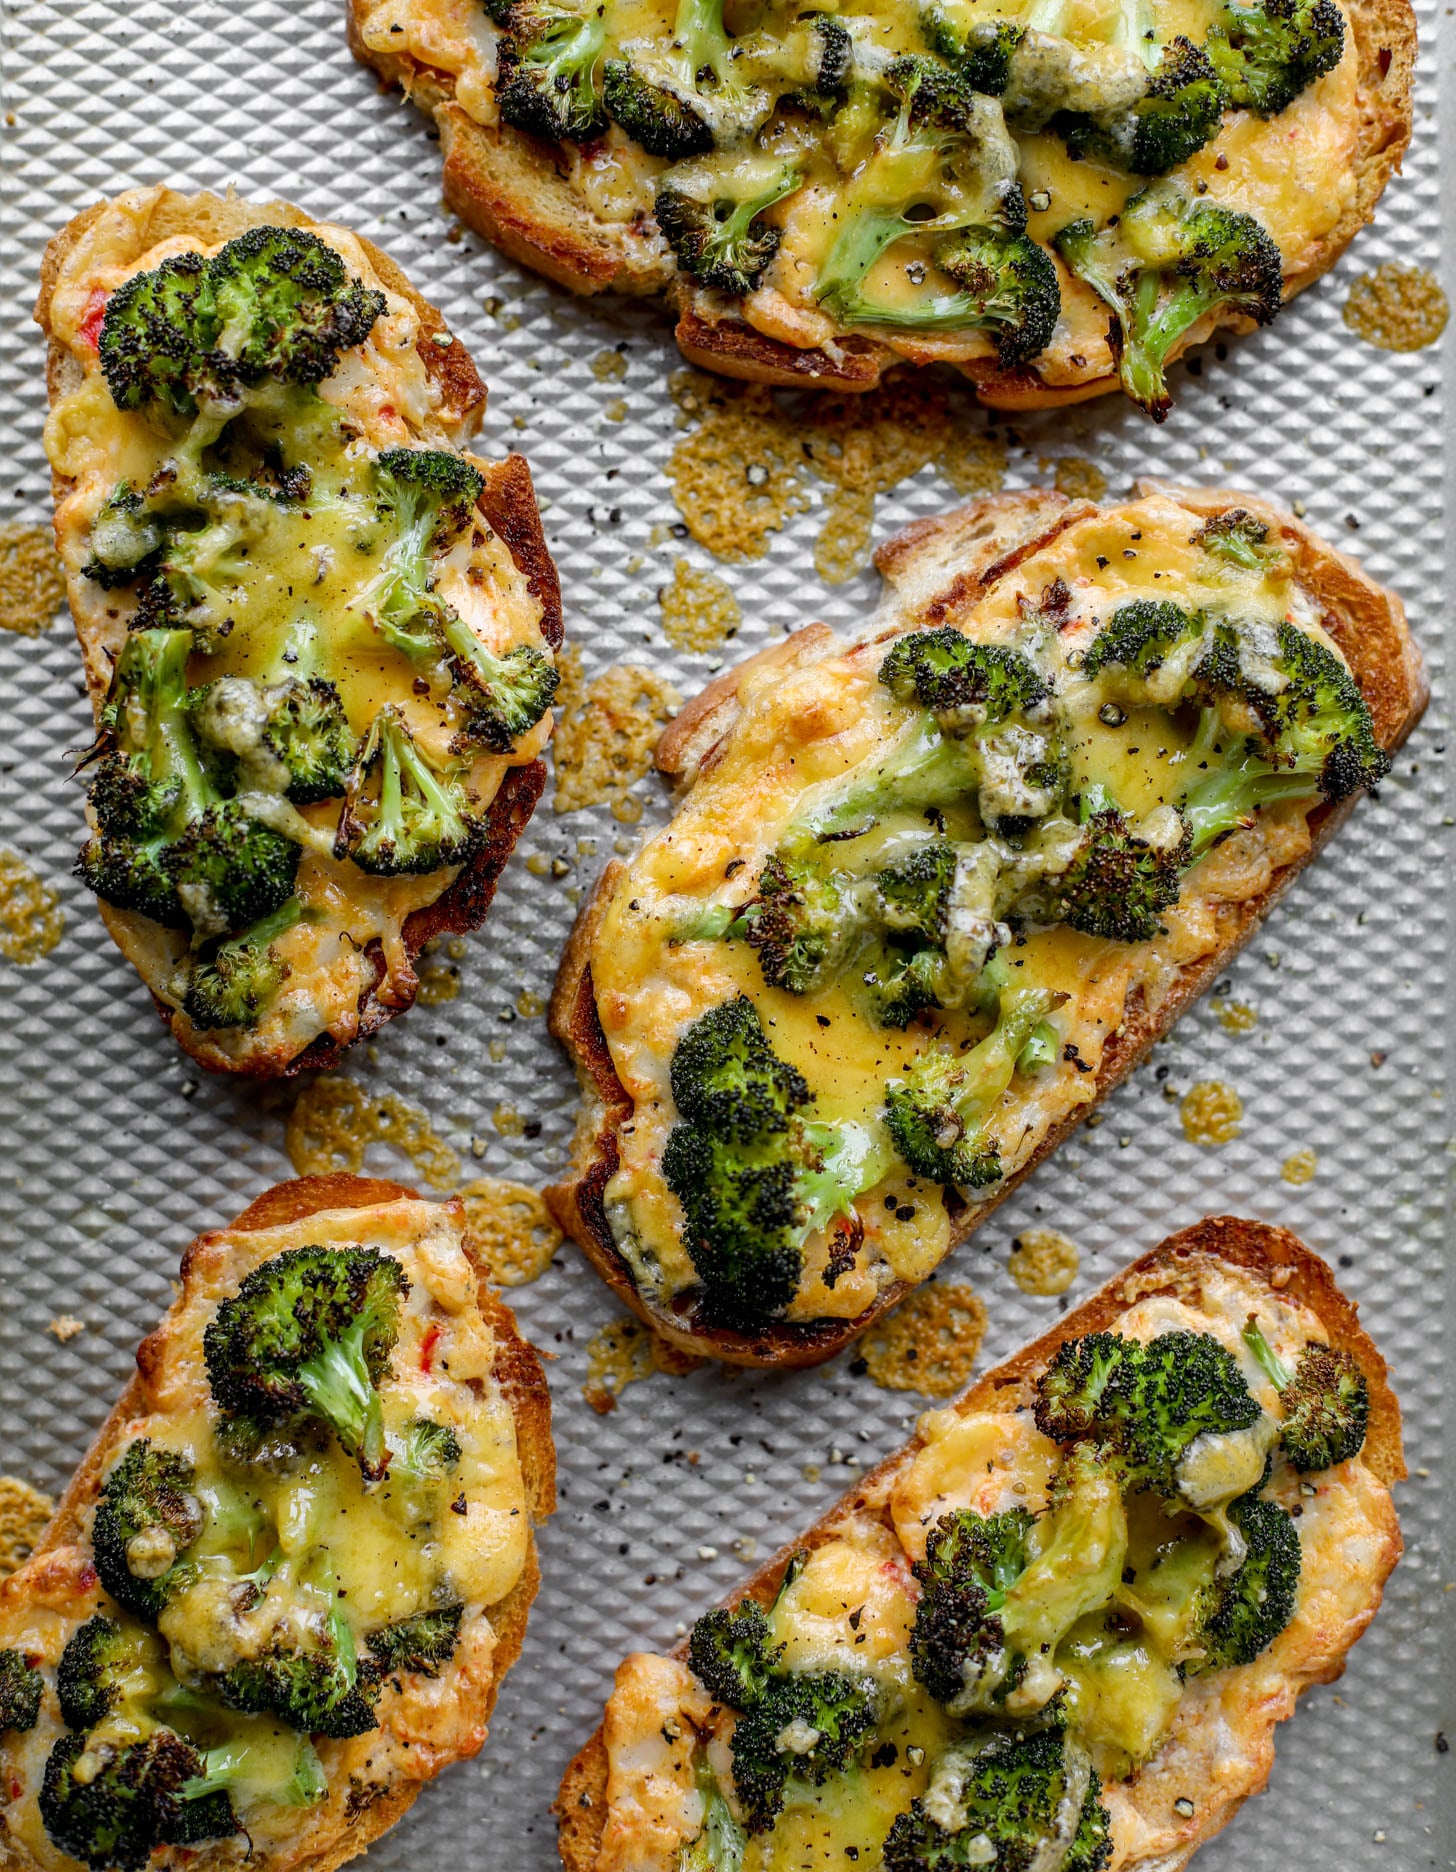 roasted broccoli pimento cheese melts out of the oven